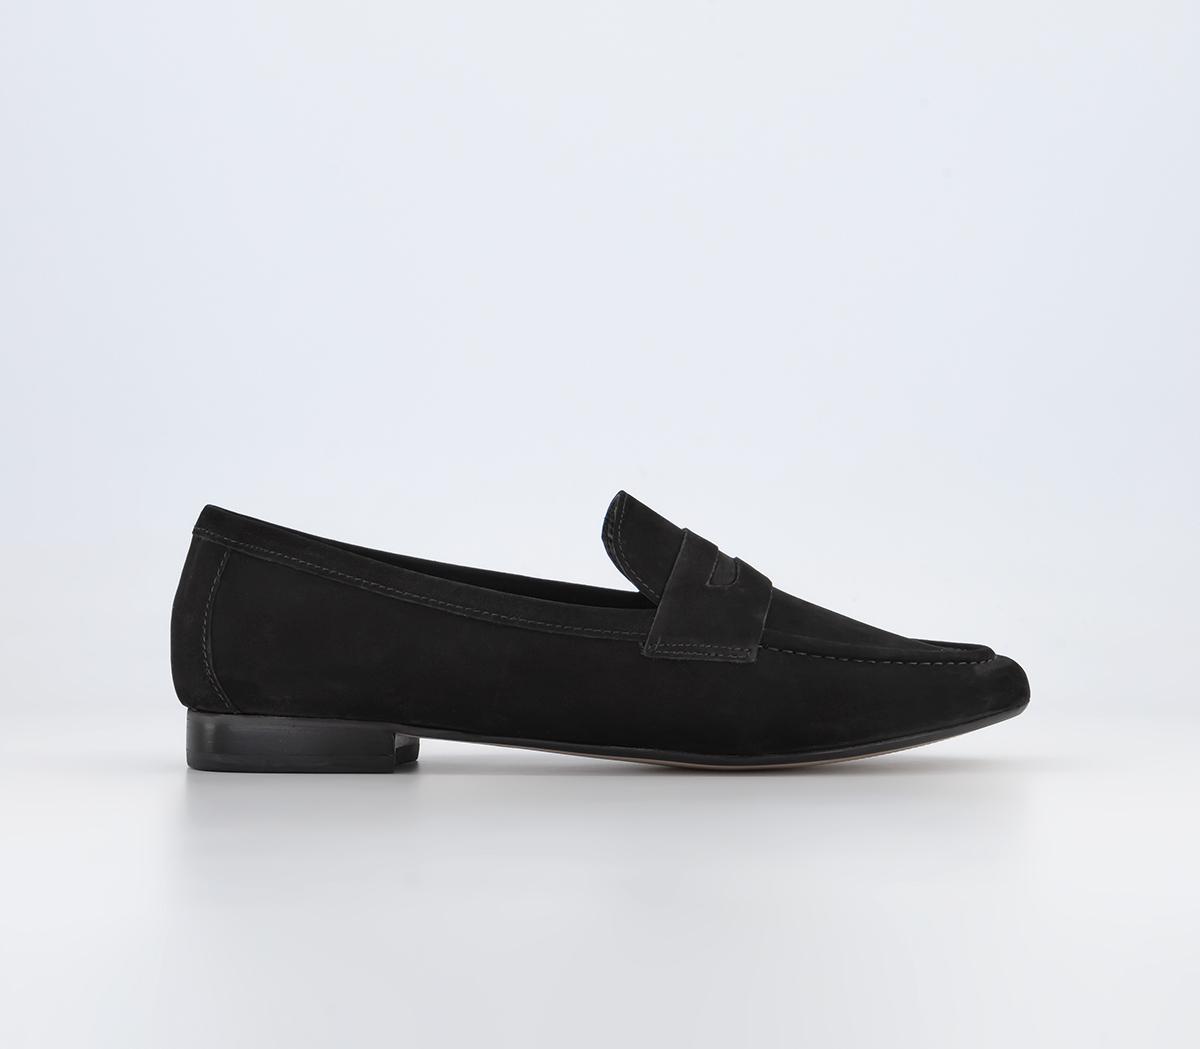 OFFICE Freedom Penny Loafers Black Nubuck - Flat Shoes for Women